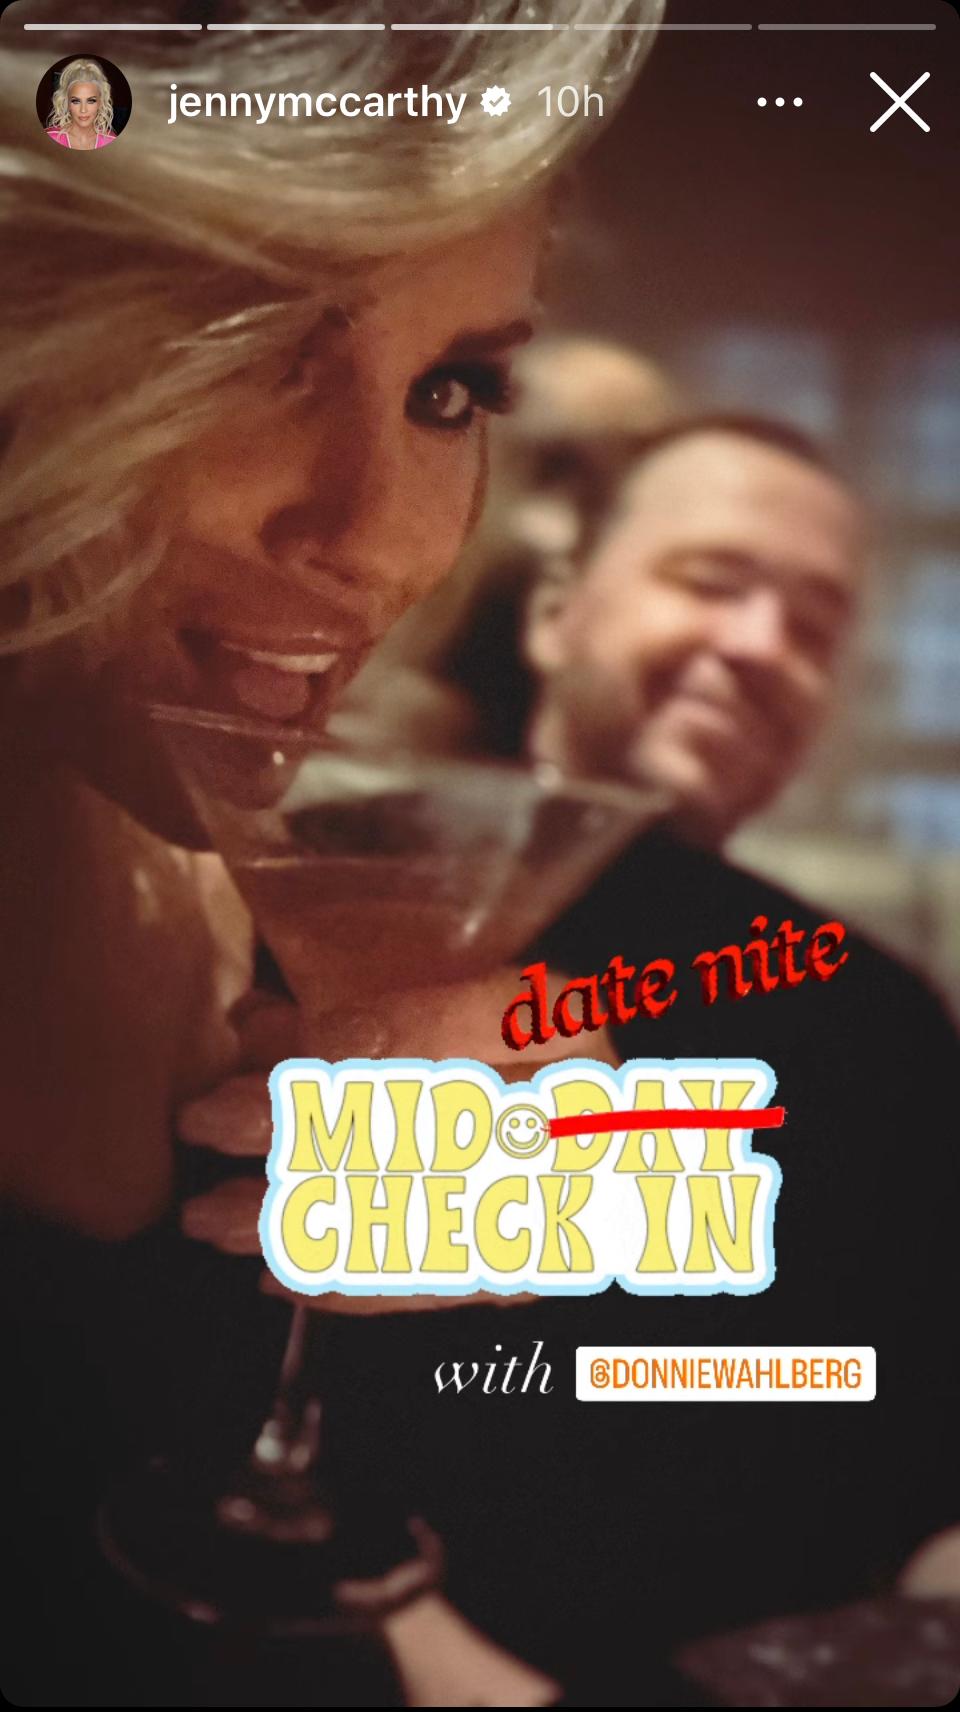 Jenny McCarthy and Donnie Wahlberg's date night